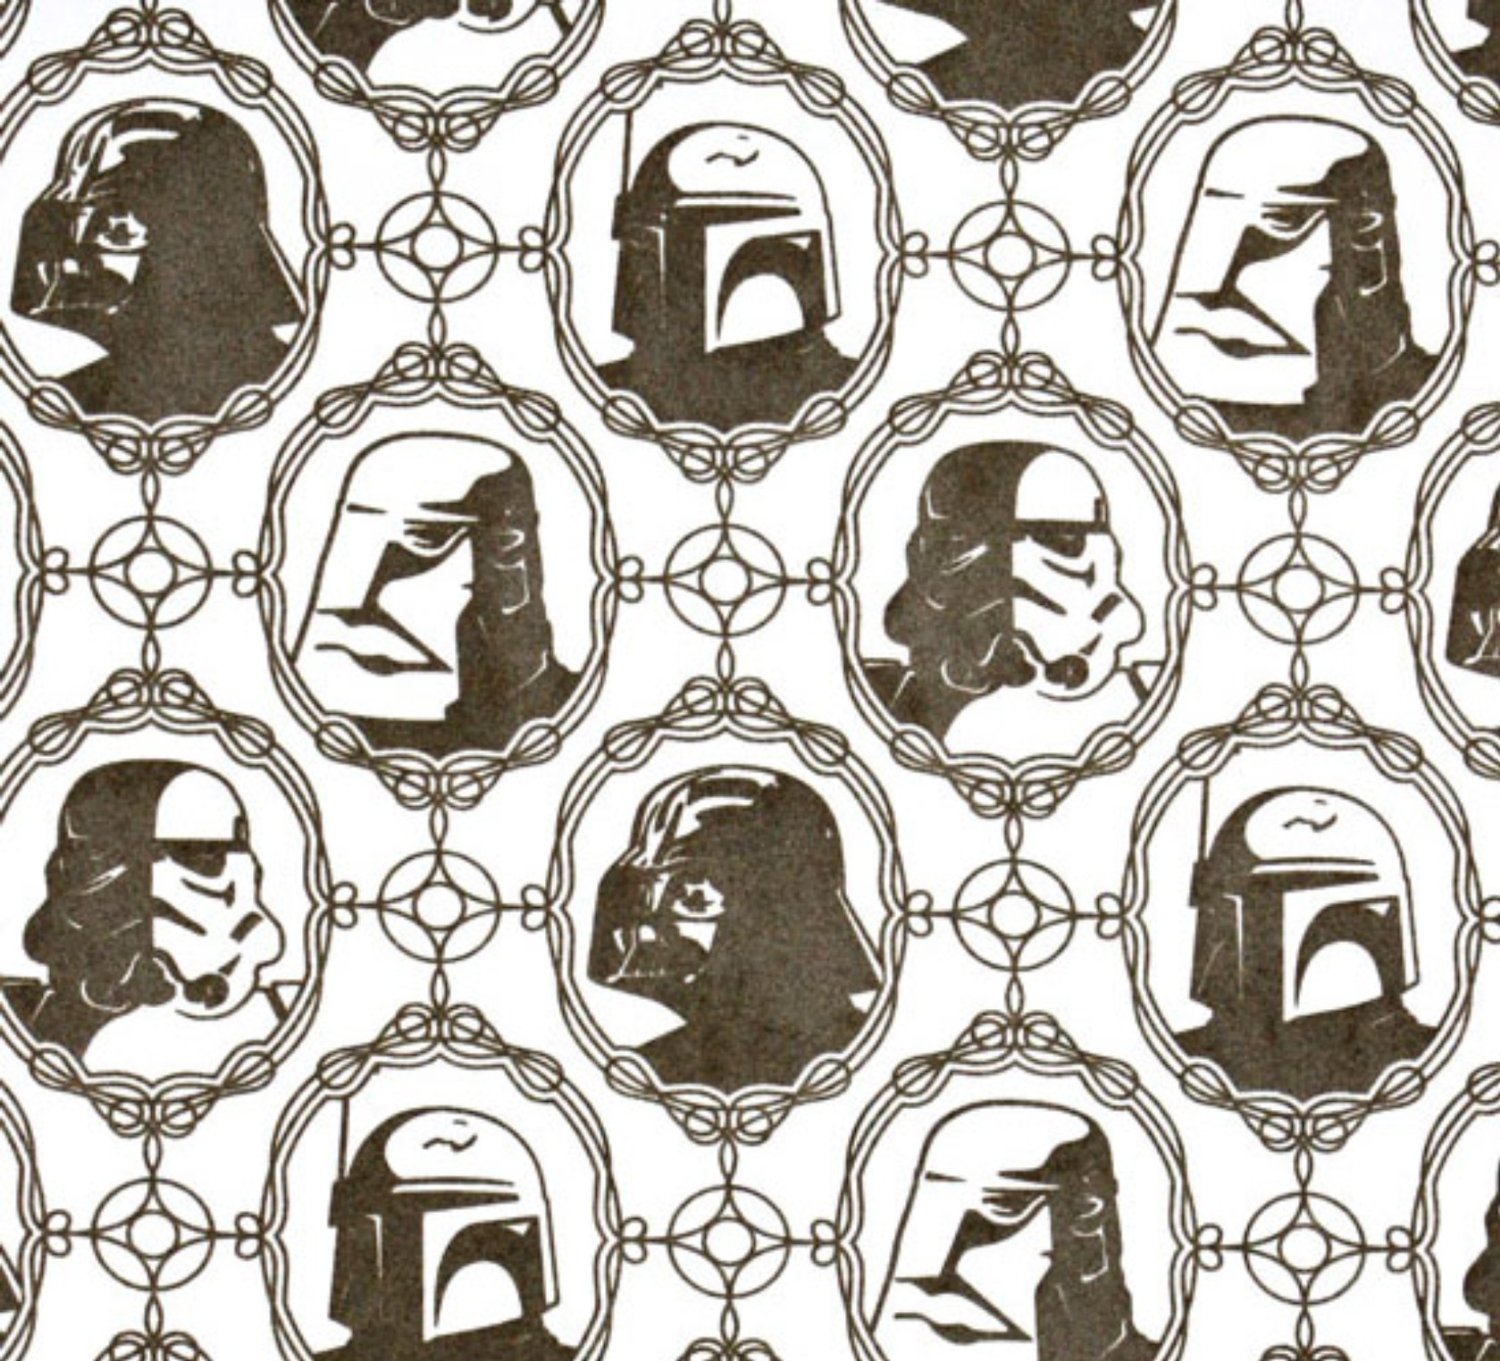 1970s Vintage Star Wars Wallpaper On  – A Daily Stop for  all Star Wars News!